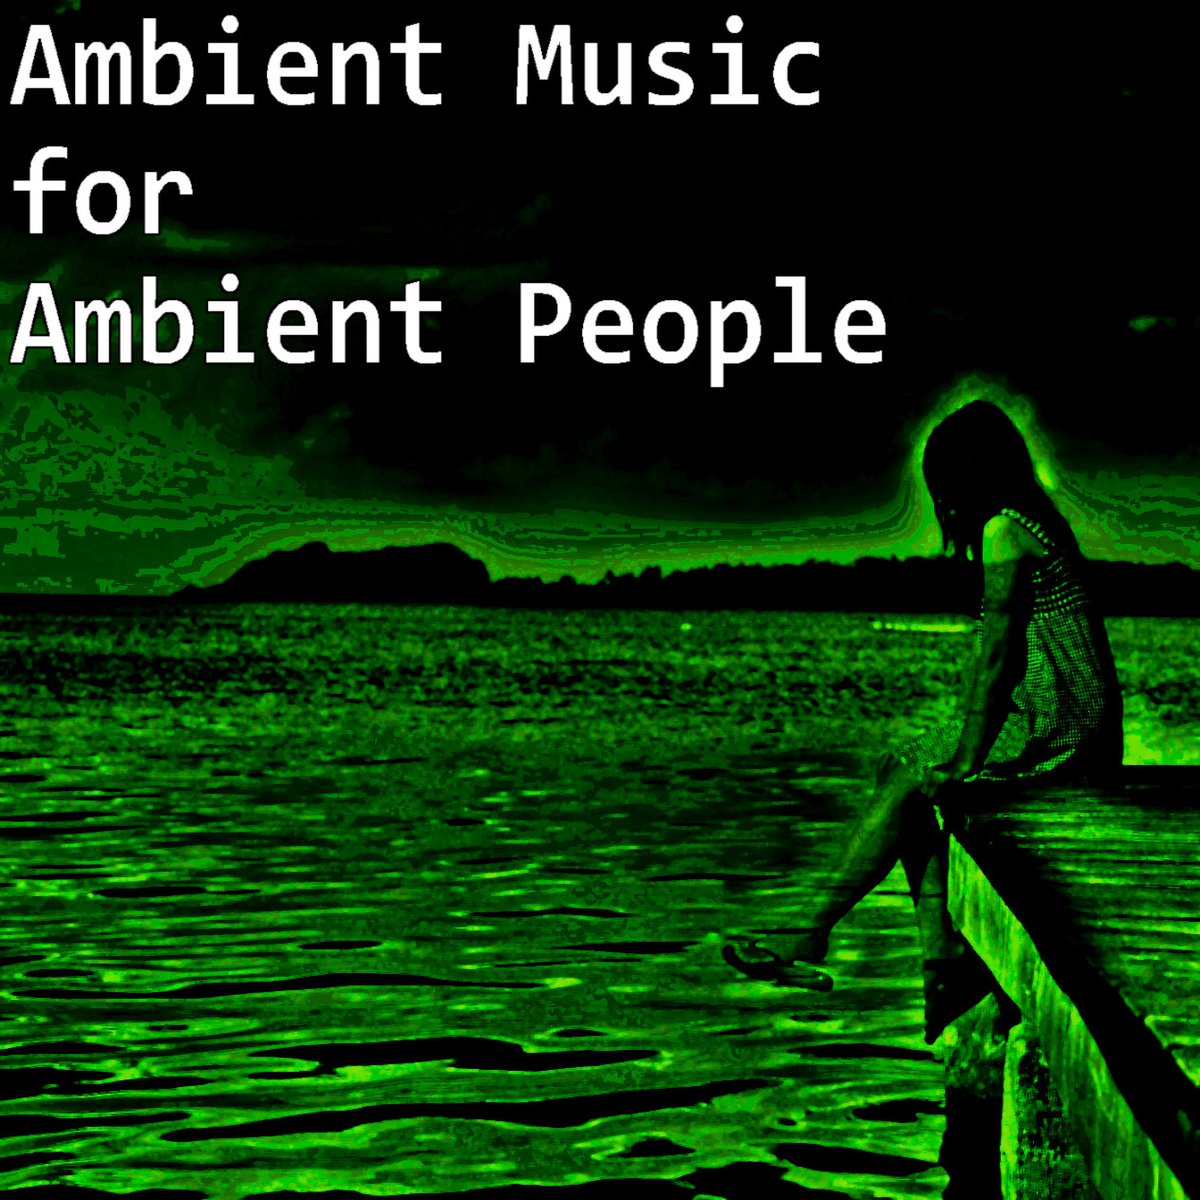 Hey there, I've updated our ambient Spotify playlist! There are 100 new and beautiful songs to hear, some truly evocative work from many talented artists. Check it out when you get some time, I hope it brightens up your day! #ambient #instrumental open.spotify.com/playlist/29CE3…